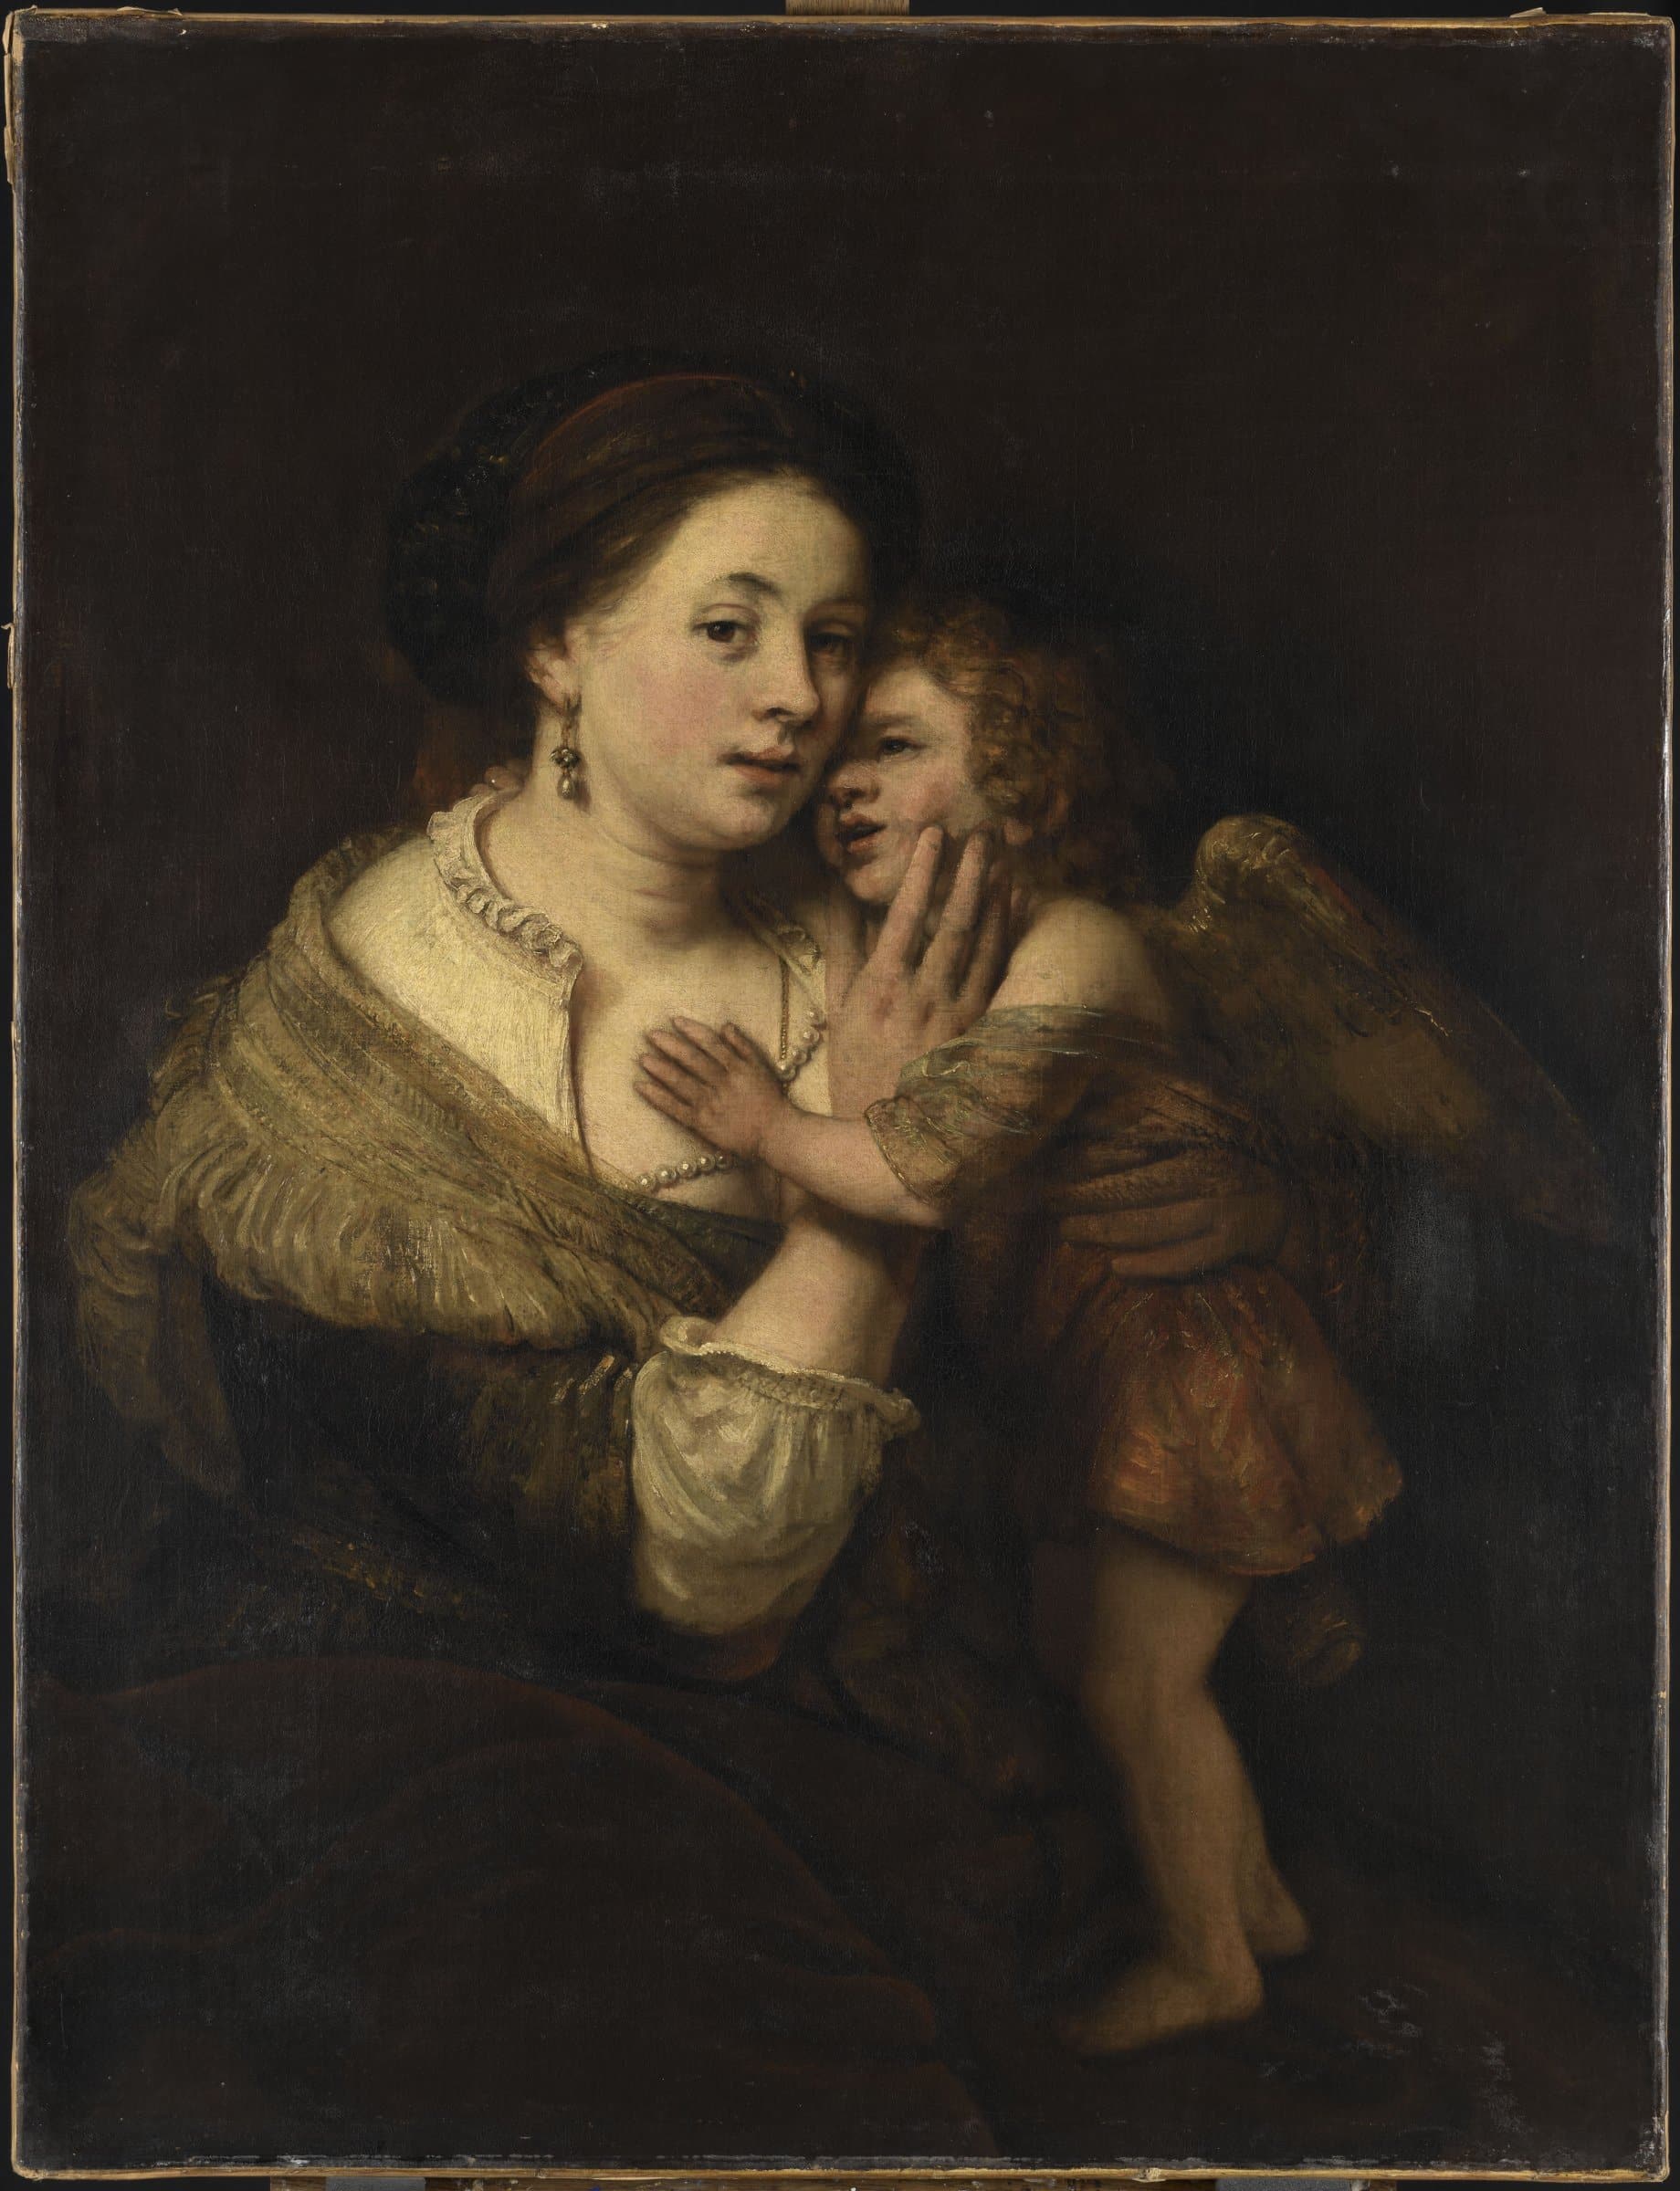 A woman wearing silk gown is seated while holding a winged child whose head rests against her cheek and hand on her chest.